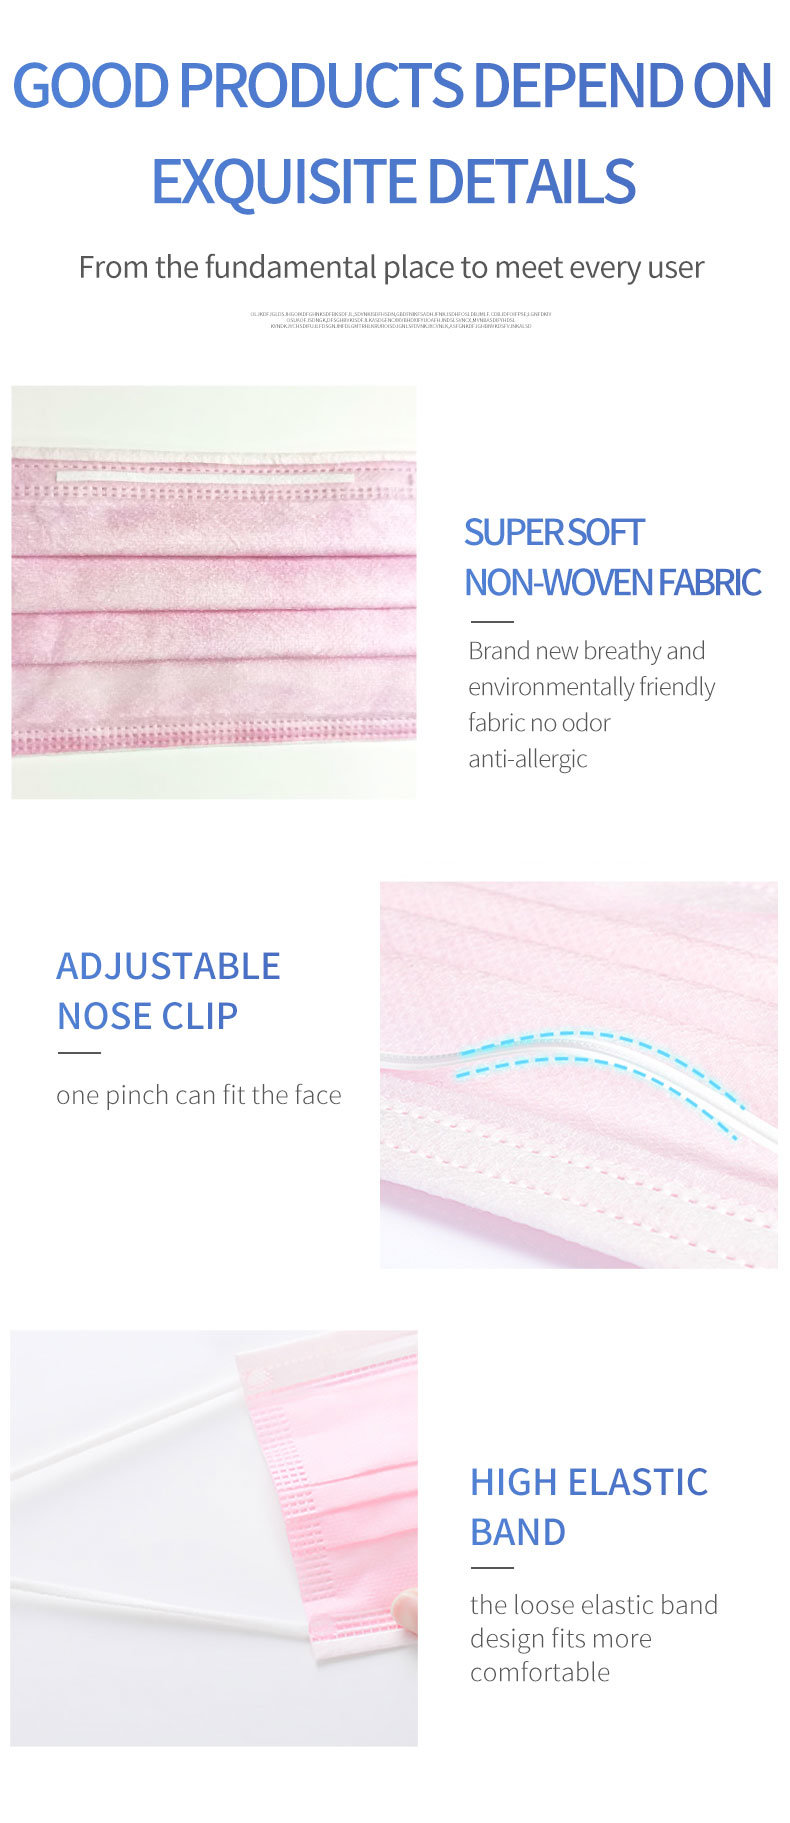 Face Mask Pink Mask Protective Dust-Proof Anti Virus En149 Non-Sterile Face Mask Protective Equipment